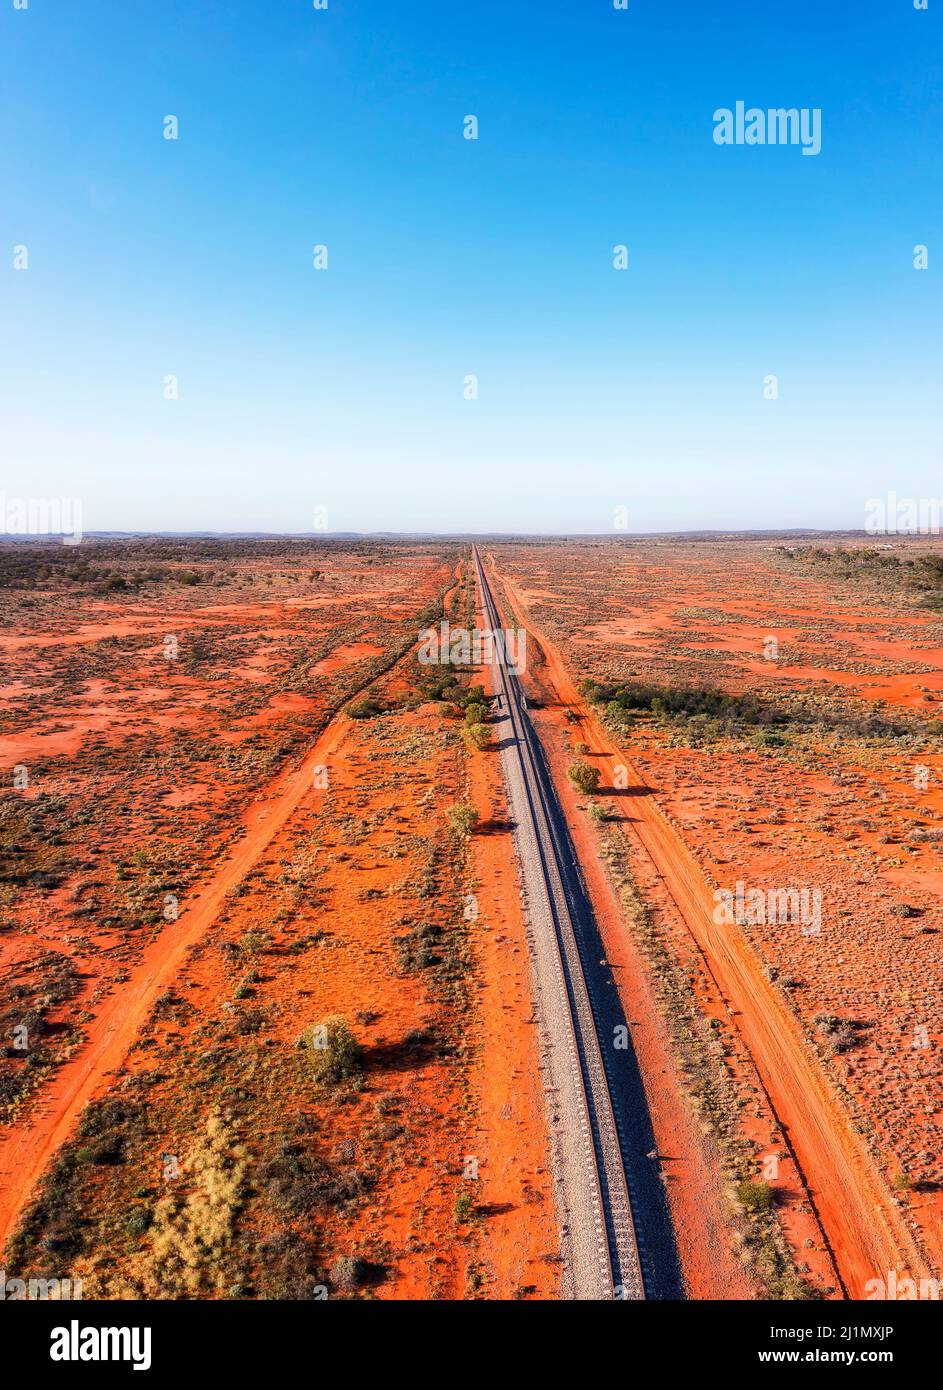 Endless single railway line in red soil outback of Australia near Broken hill mining city - aerial vertical panorama. Stock Photo